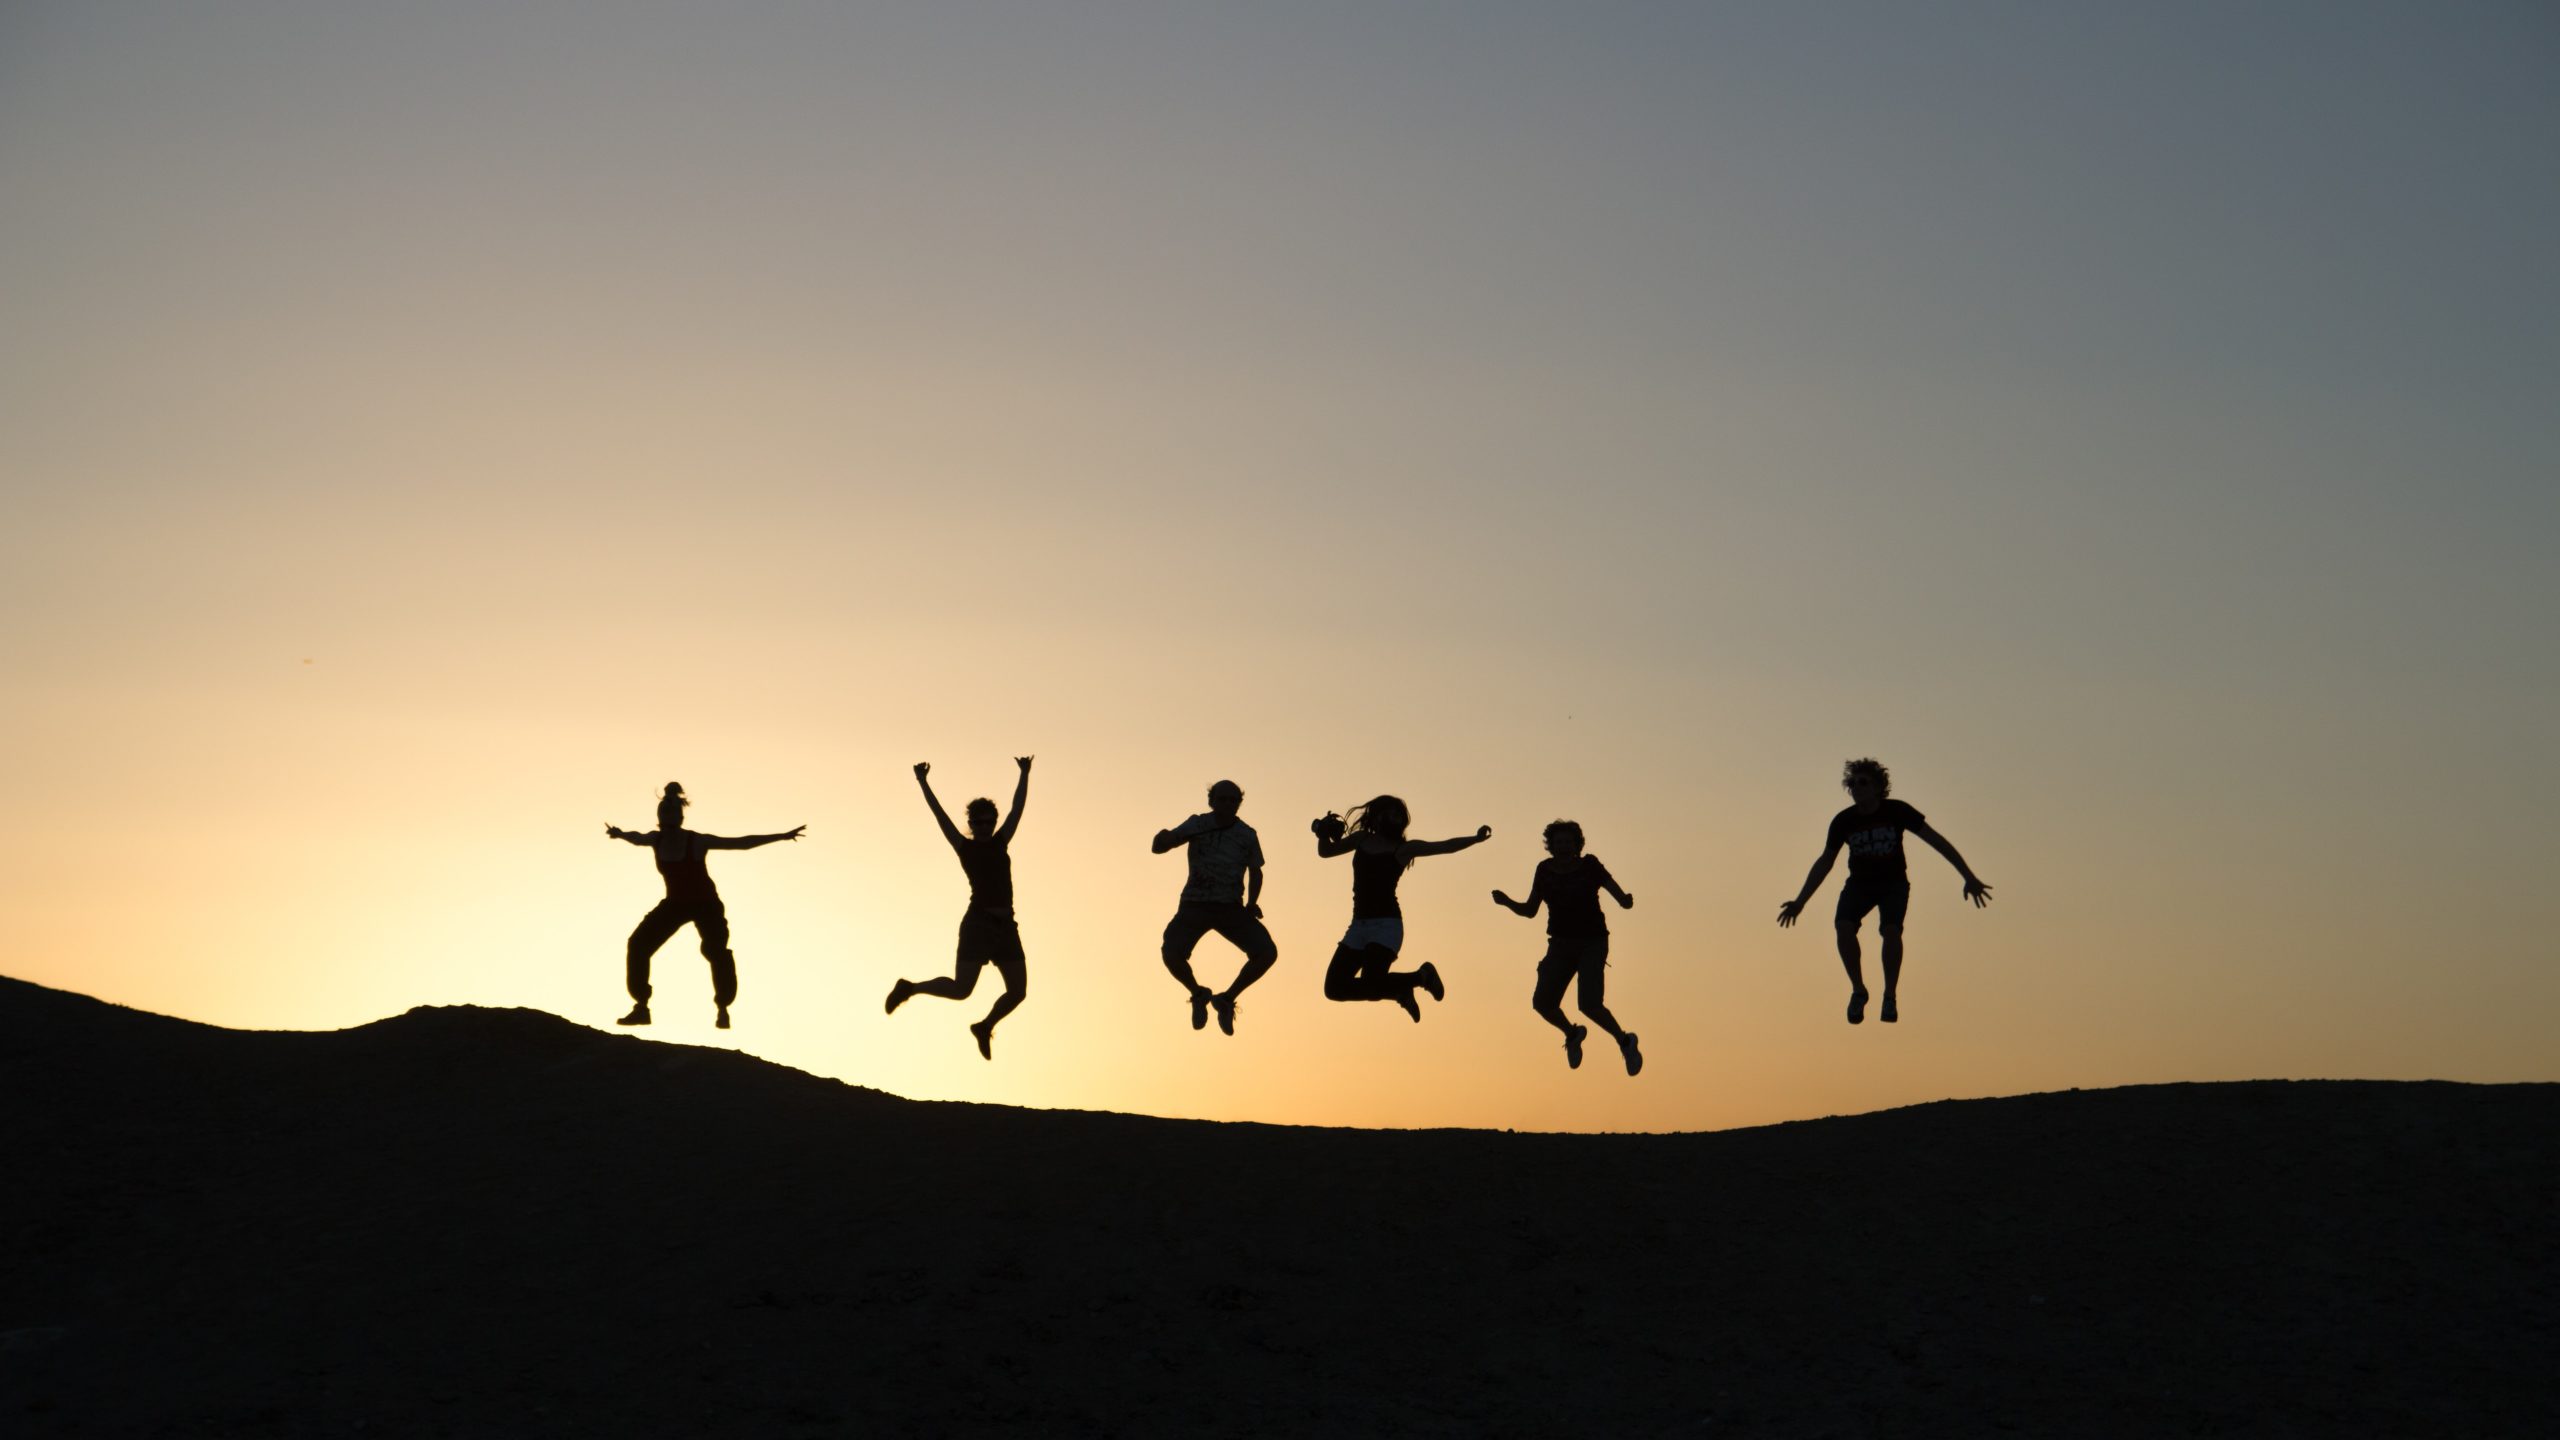 Five silhouettes jumping